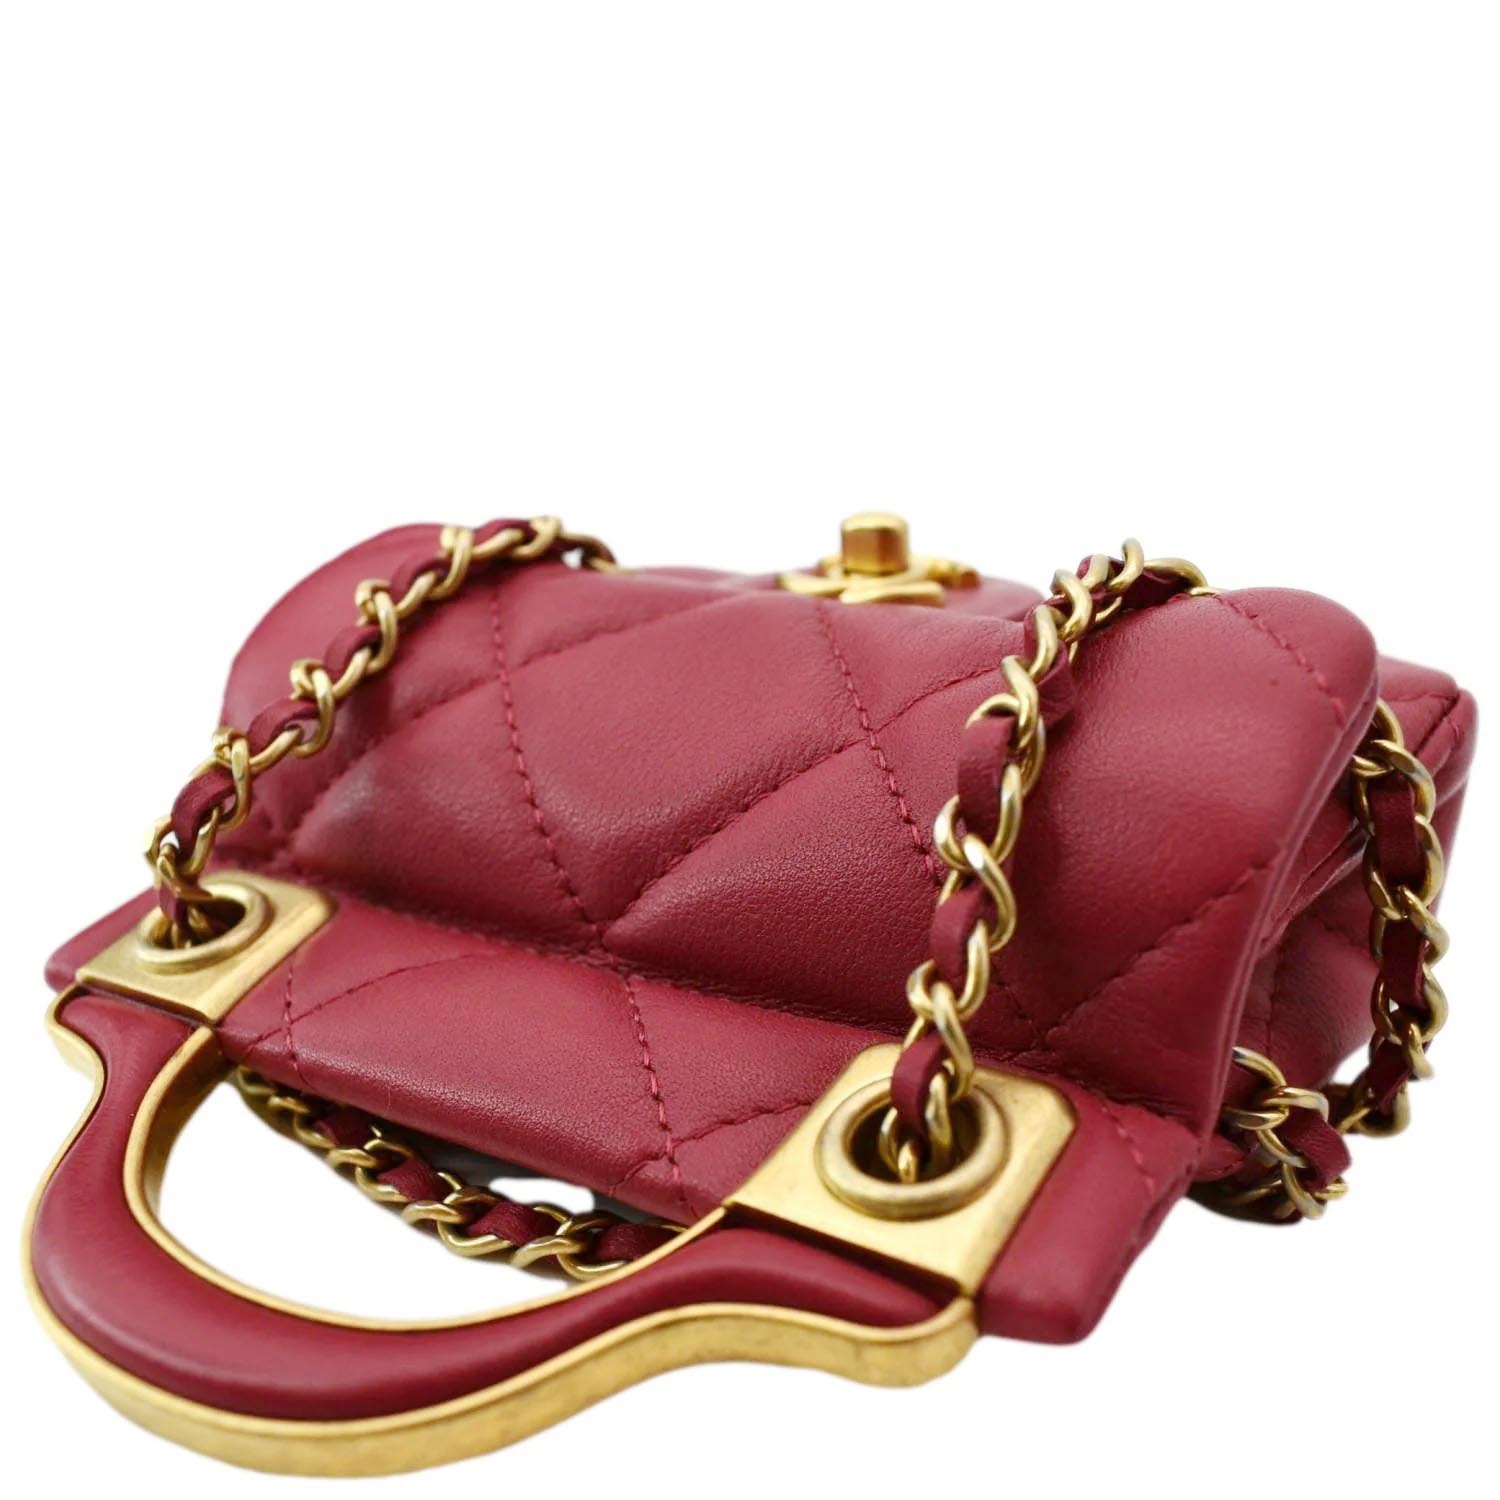 Pink Quilted Calfskin Flap Card Holder with Chain Gold Hardware, 2021